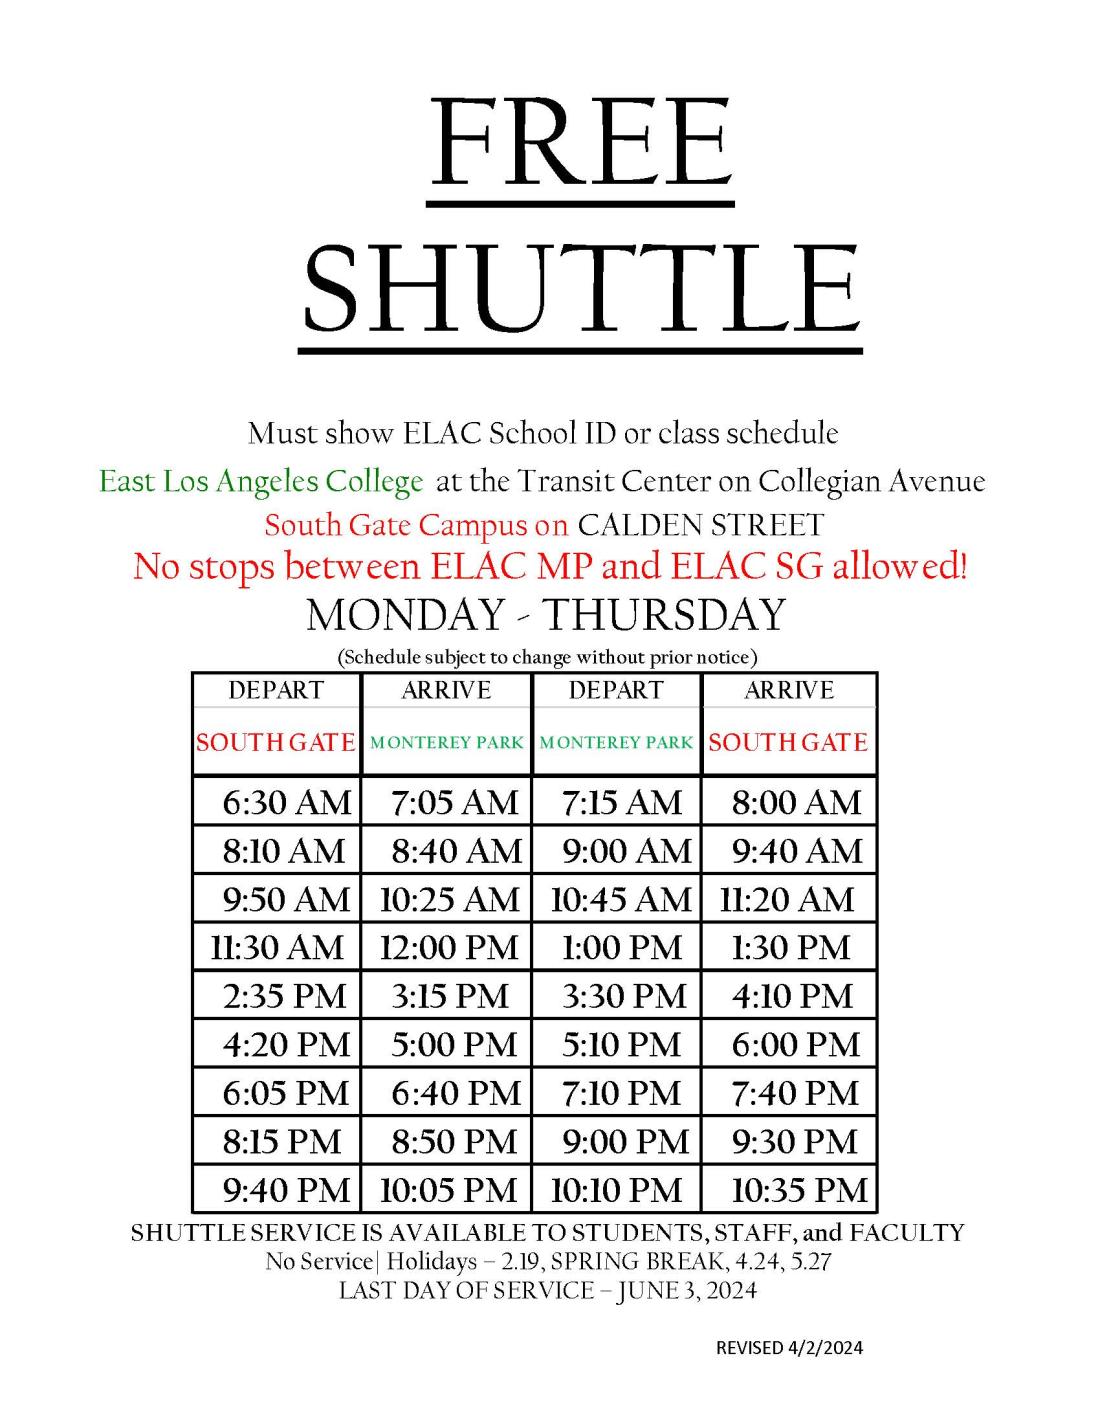 shuttle times between South Gate and Monterey Park 